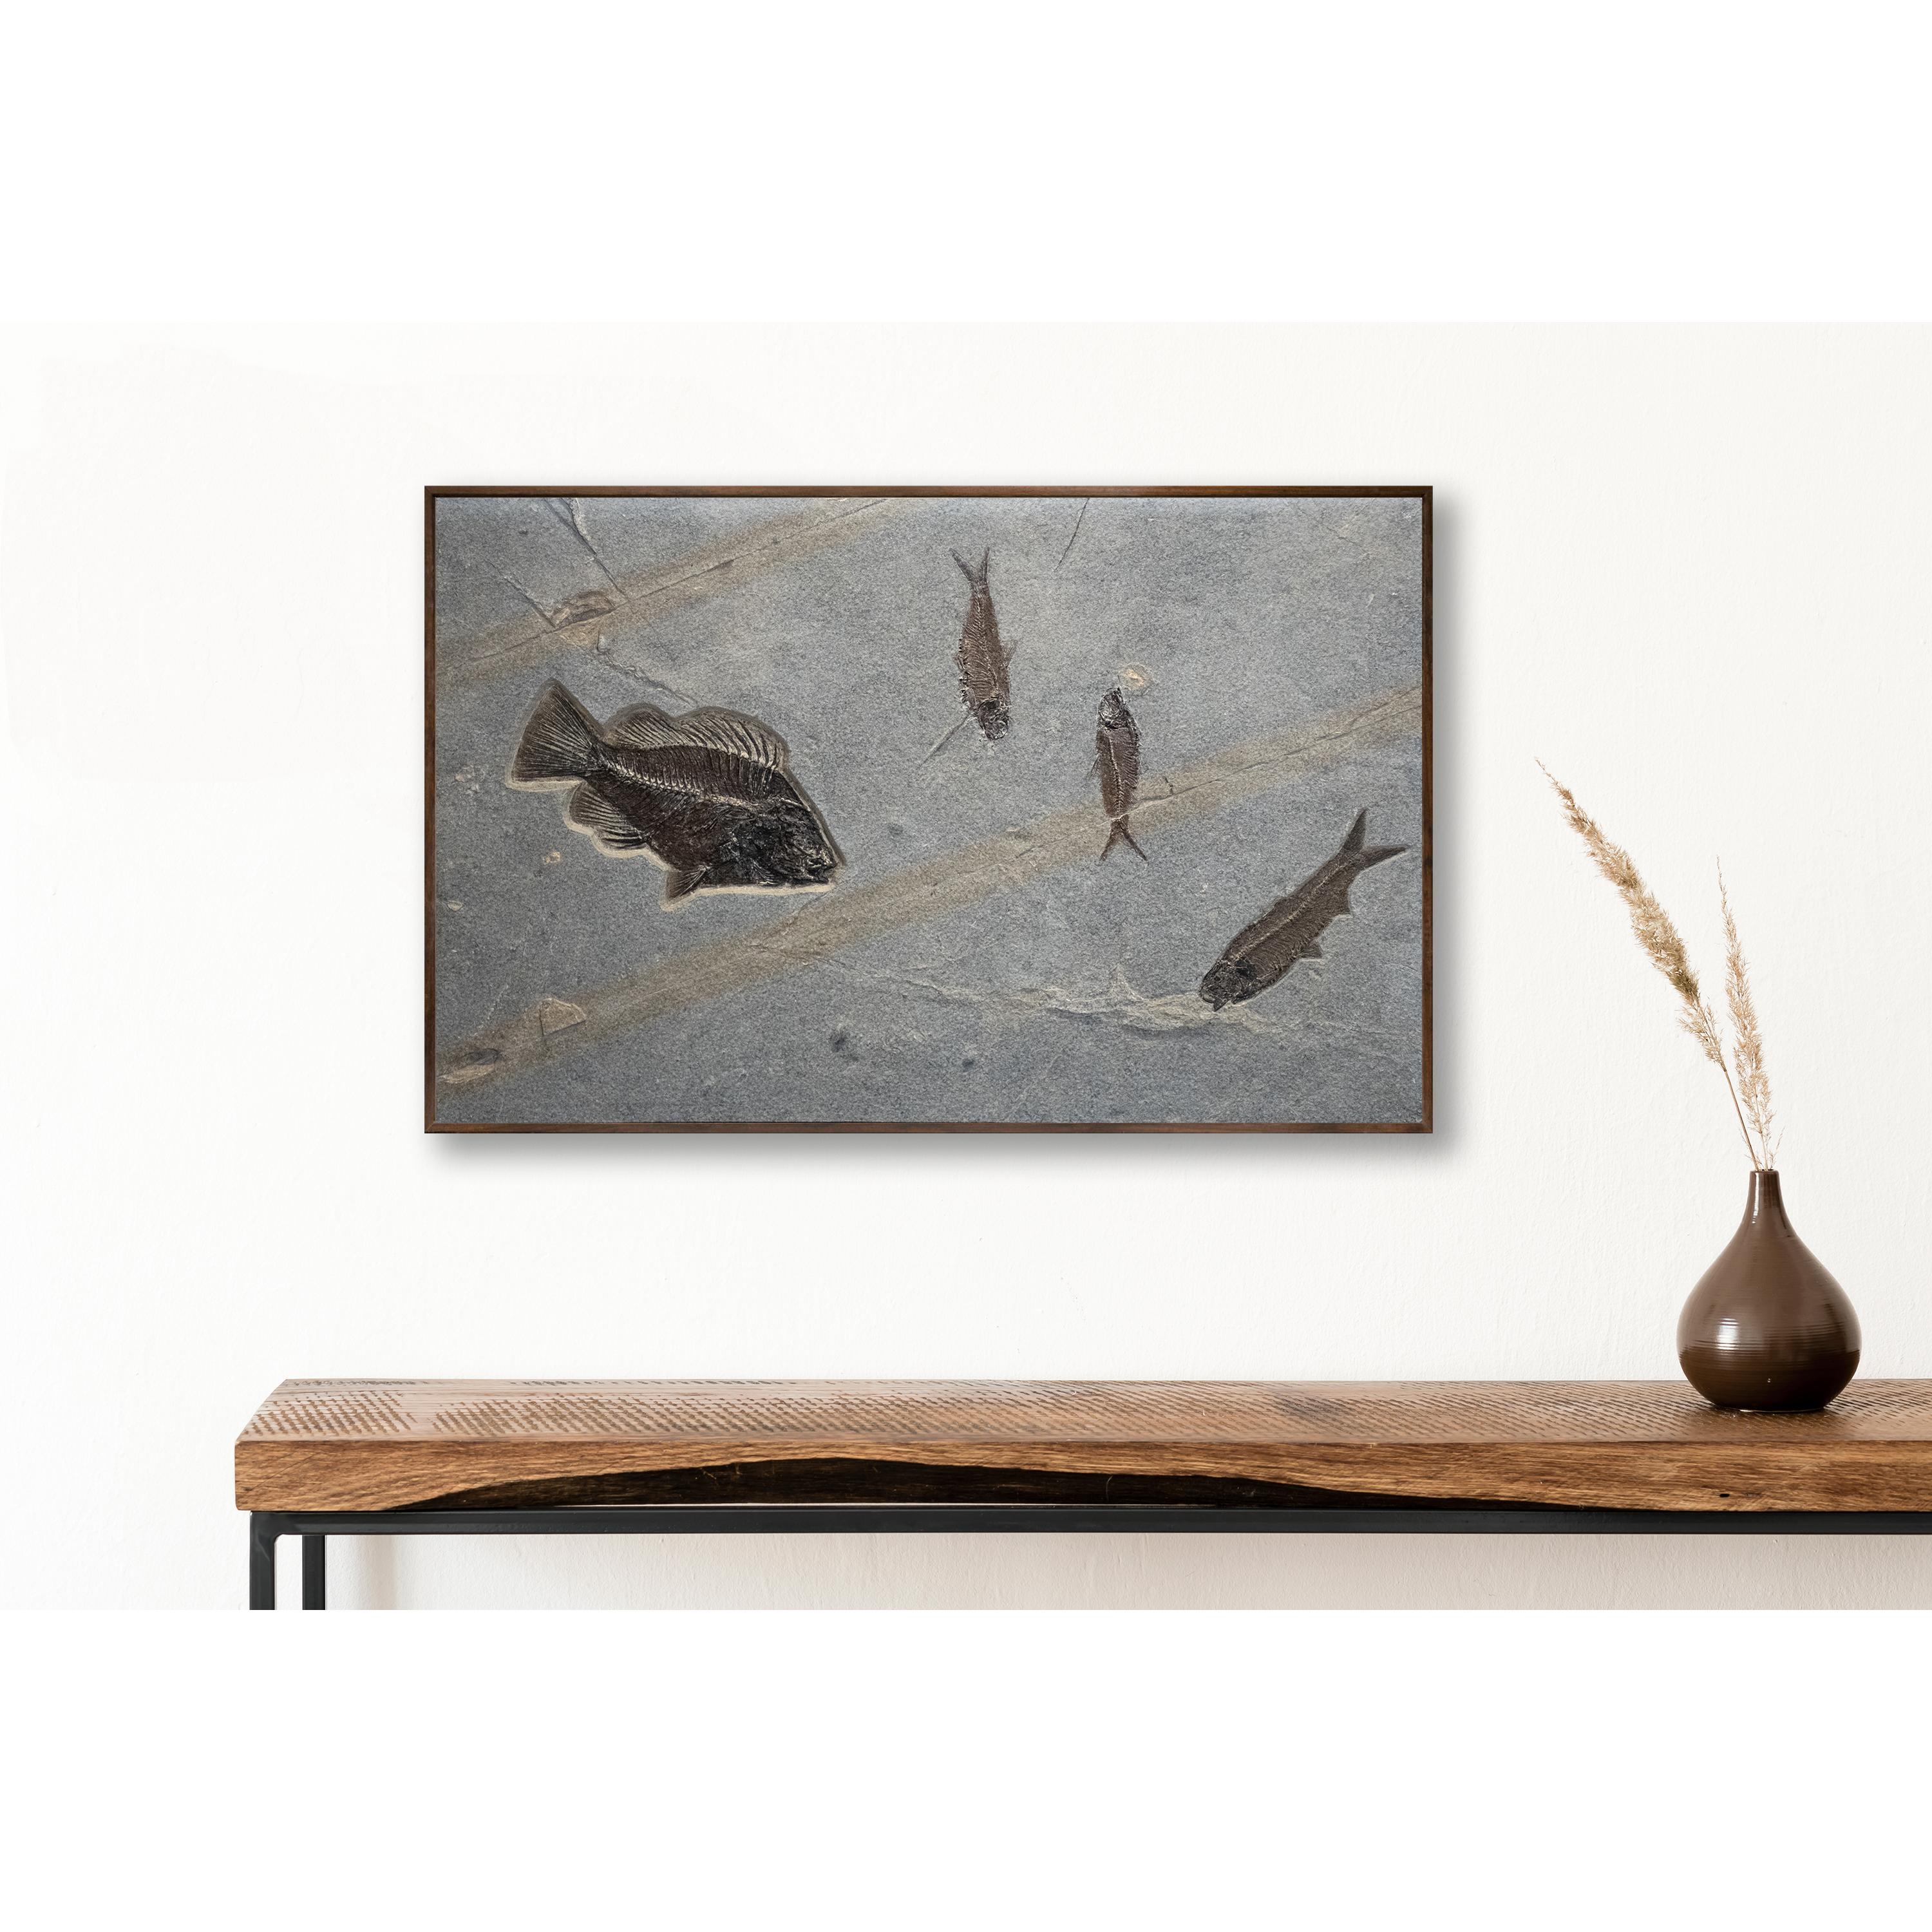 Four Eocene Era fossil fish from the Green River Formation are featured in this sculptural stone mural: a Cockerellites liops (formerly known as Priscacara) accented by three smaller Knightia eocaena. These fossil fish are about 50 million years old